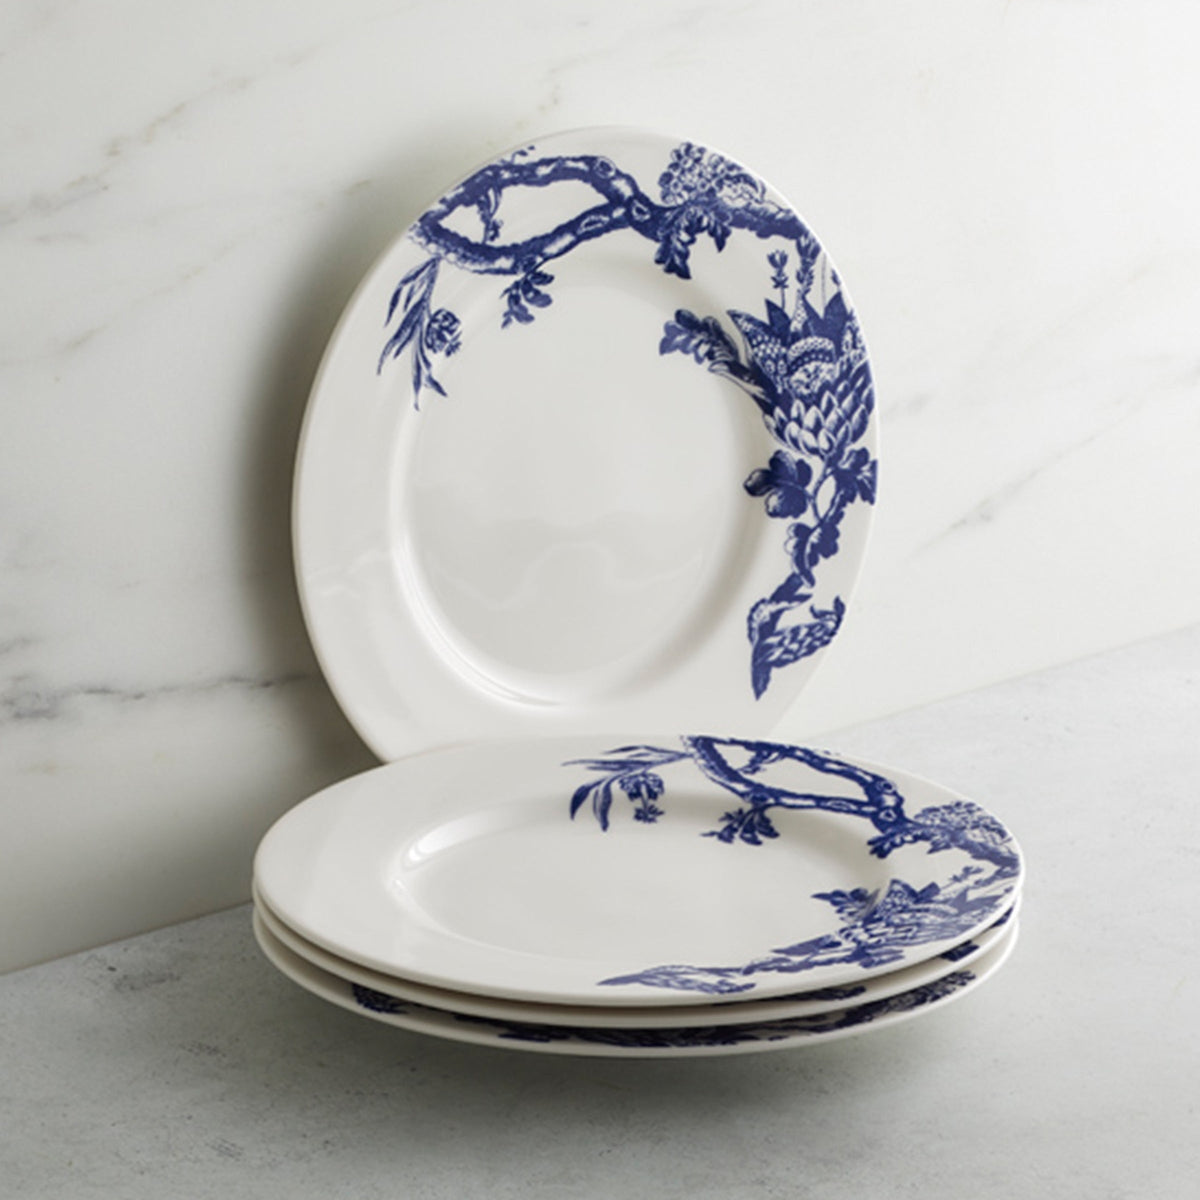 Three white ceramic Arcadia Rimmed Salad Plates by Caskata Artisanal Home, with intricate blue floral and bird designs, are stacked on a light grey surface.